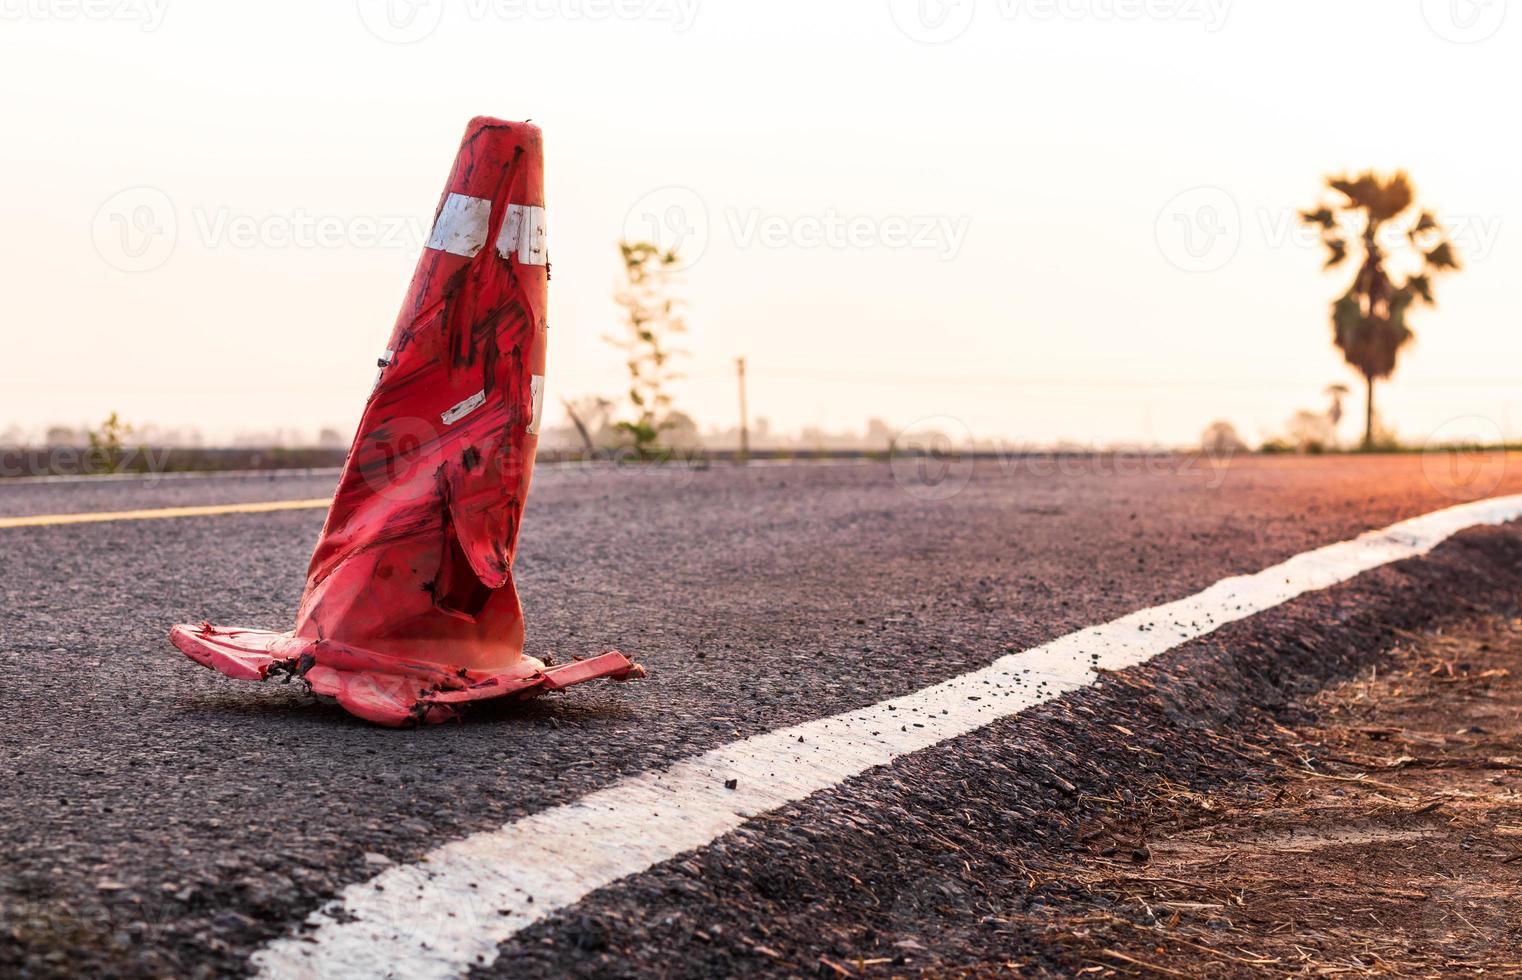 The rubber cone was demolished on the paved road. photo